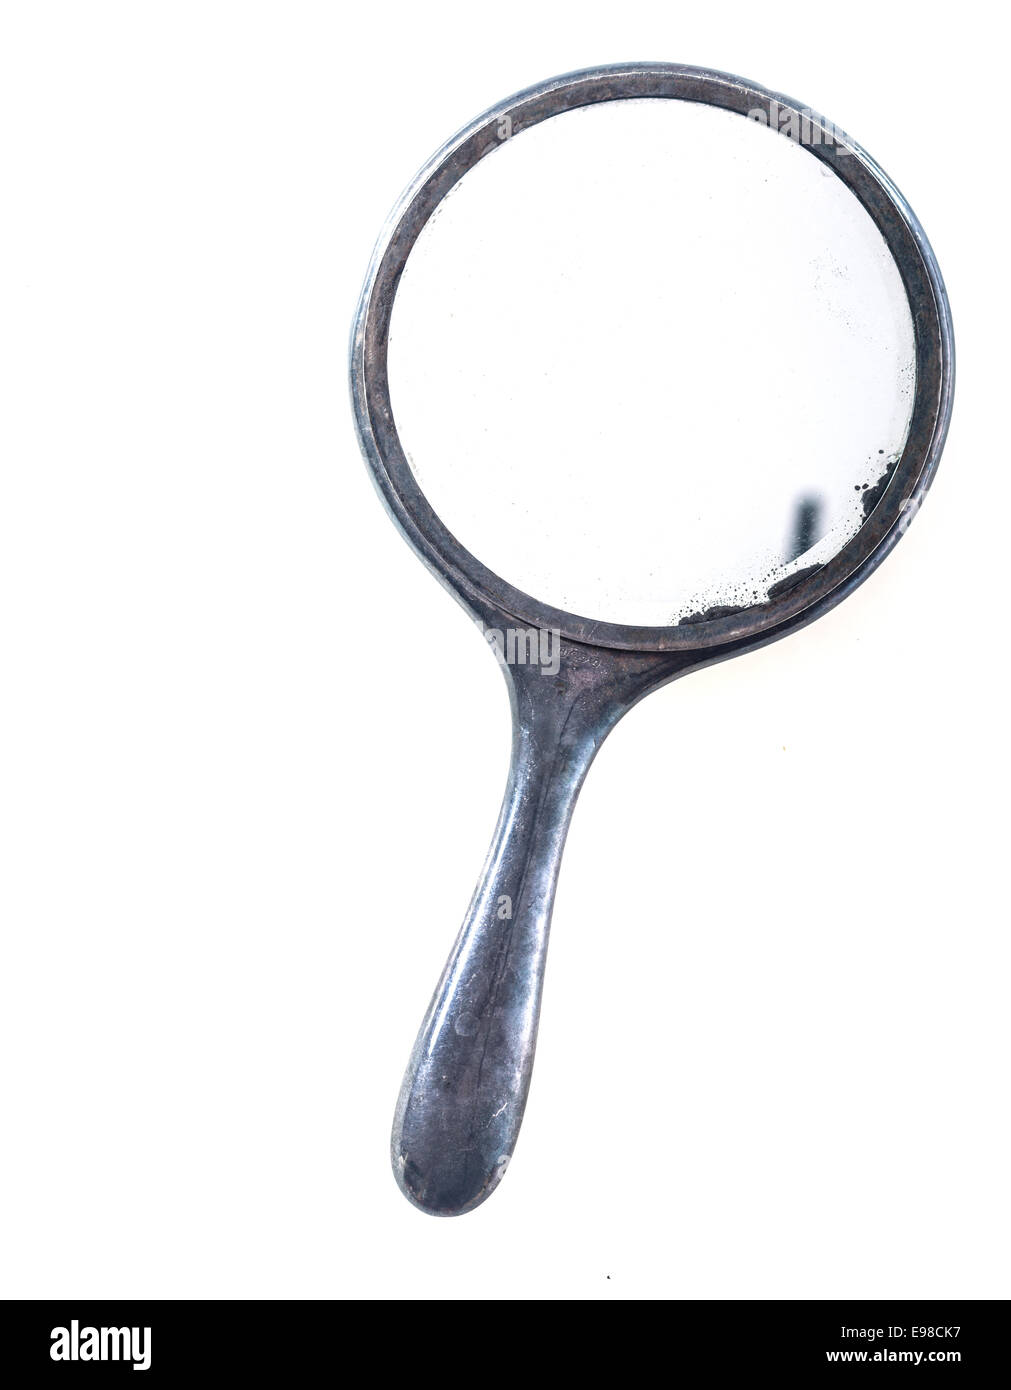 Old grunge vintage metal hand mirror with a round glass from a vanity set isolated on white with copyspace Stock Photo